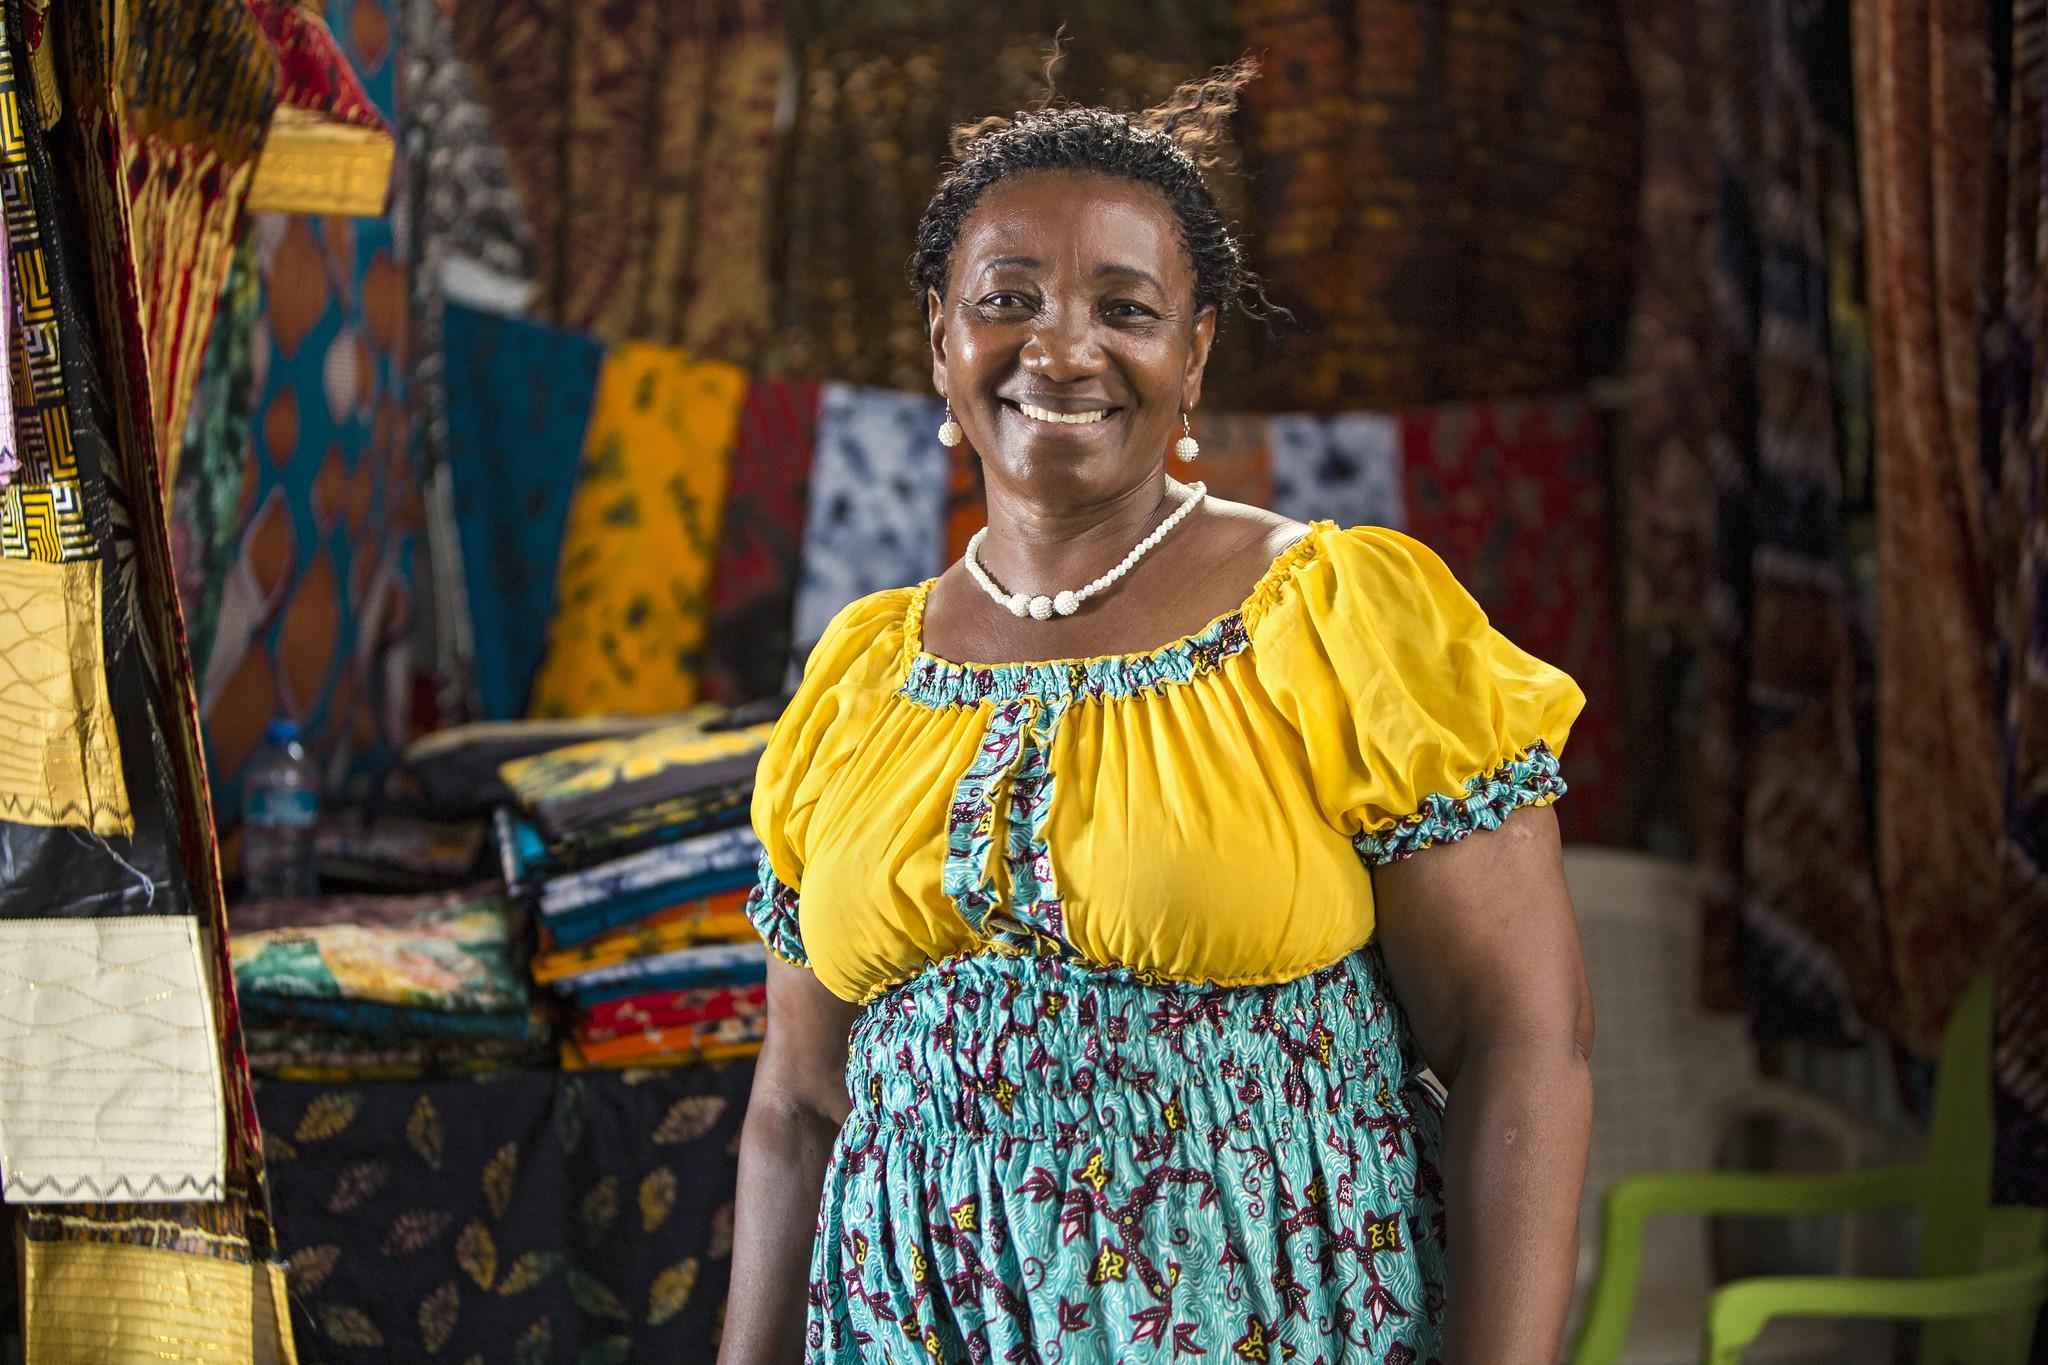 Betty Mtewele, a market vendor and Chair of the National Women’s Association for Informal Market Traders.